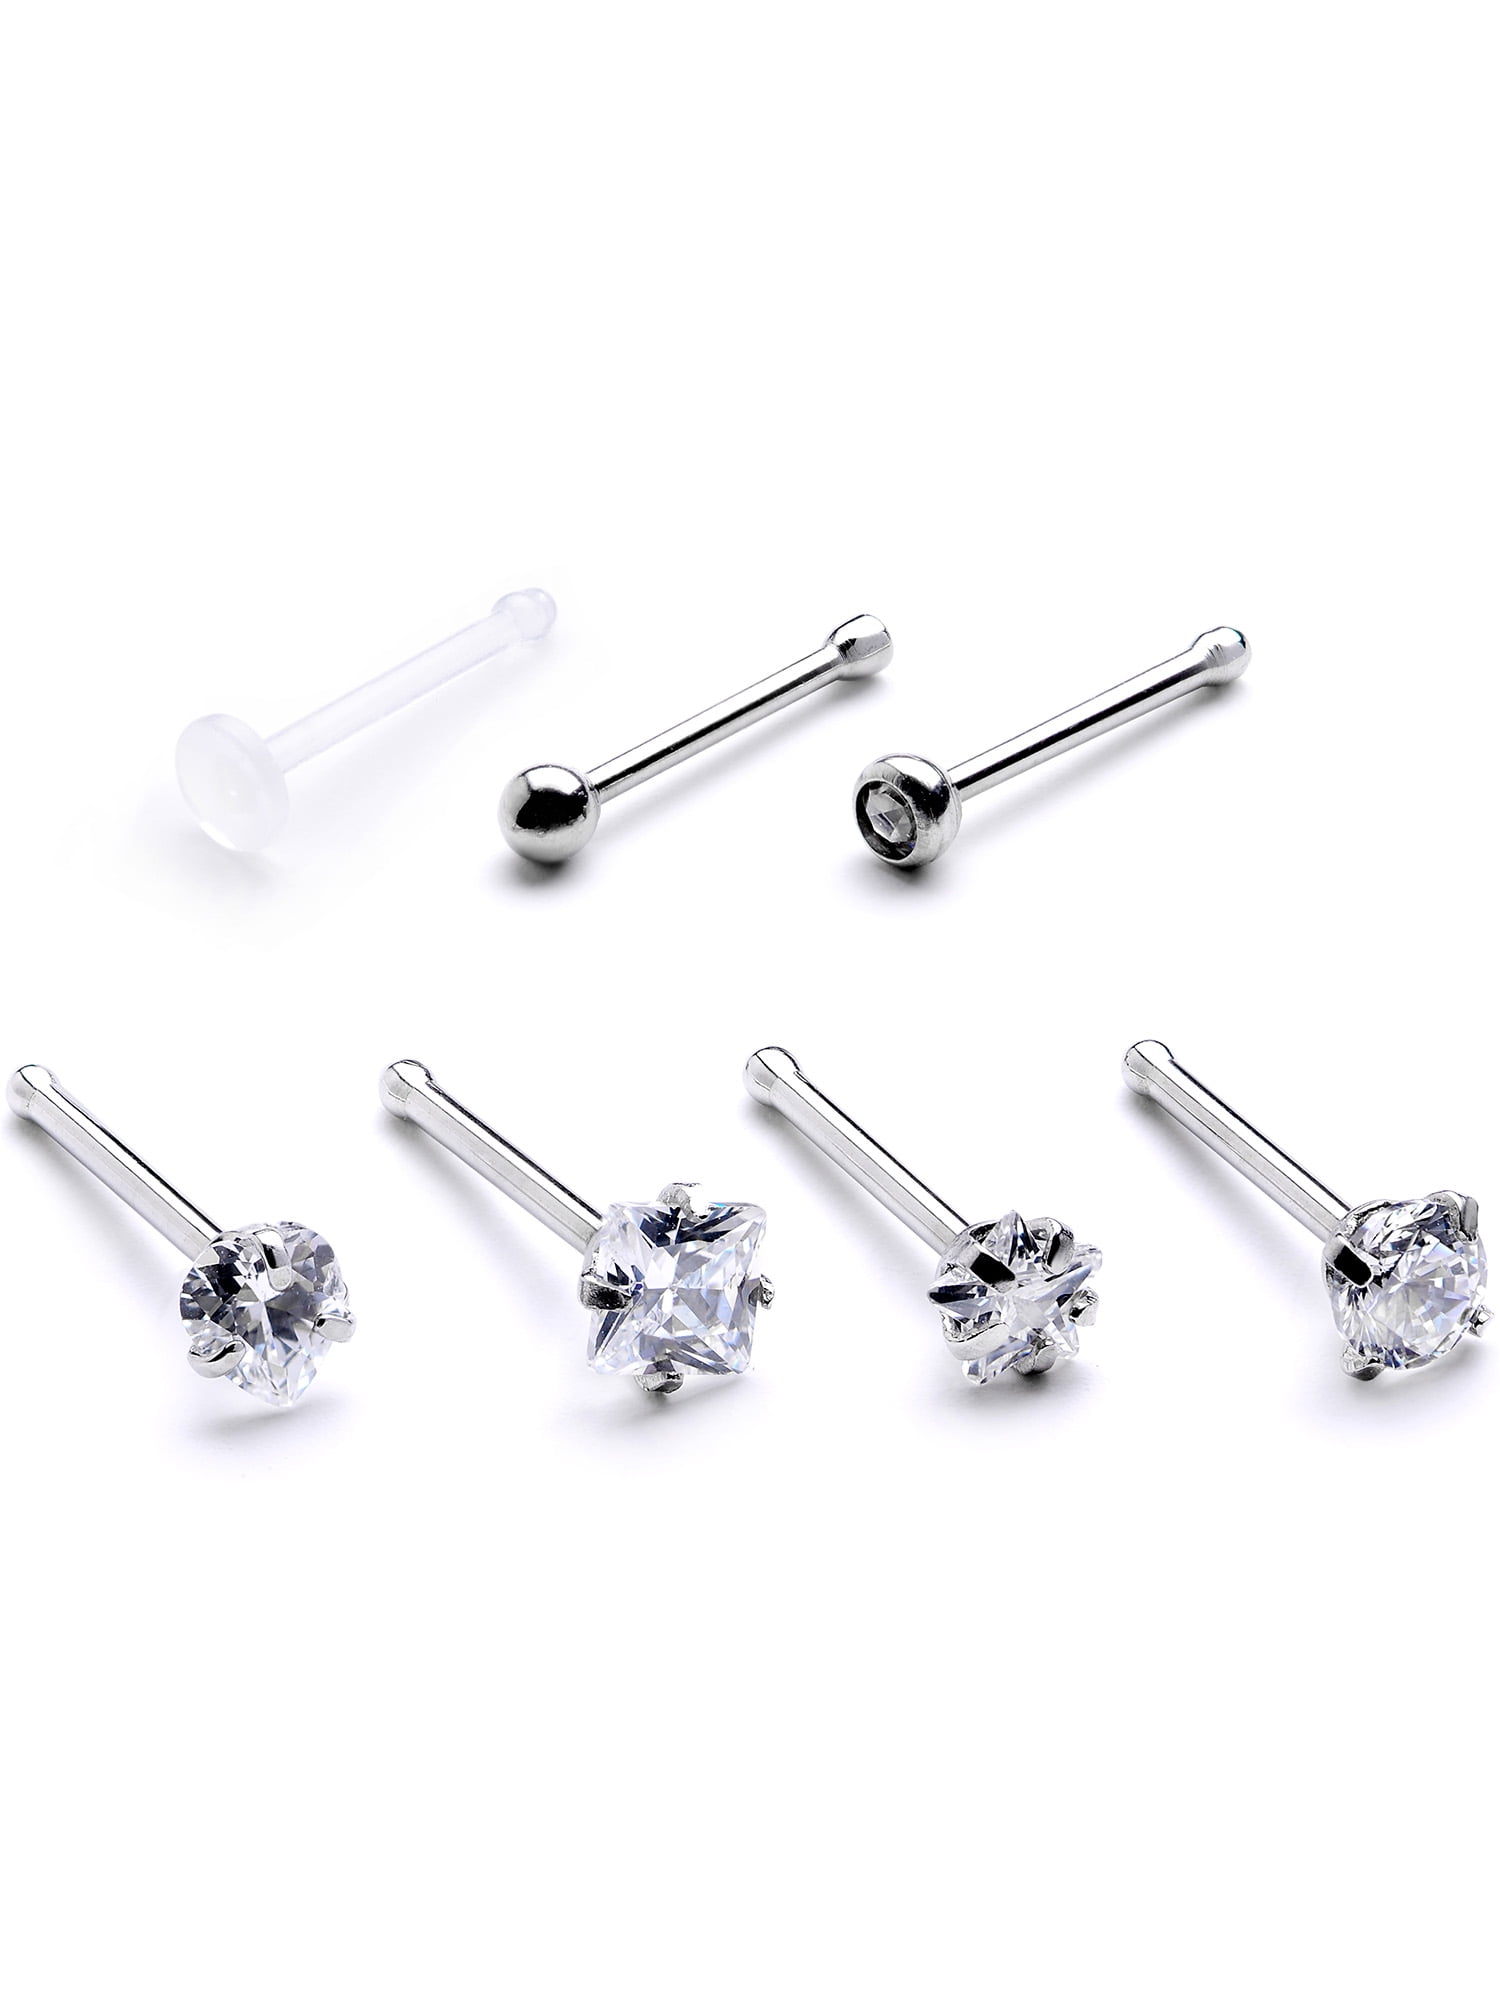 Personalized Piercing Nose Stud Stainless Steel Rhinestone Nose Stud Fashion Body Piercing Jewelry for Women